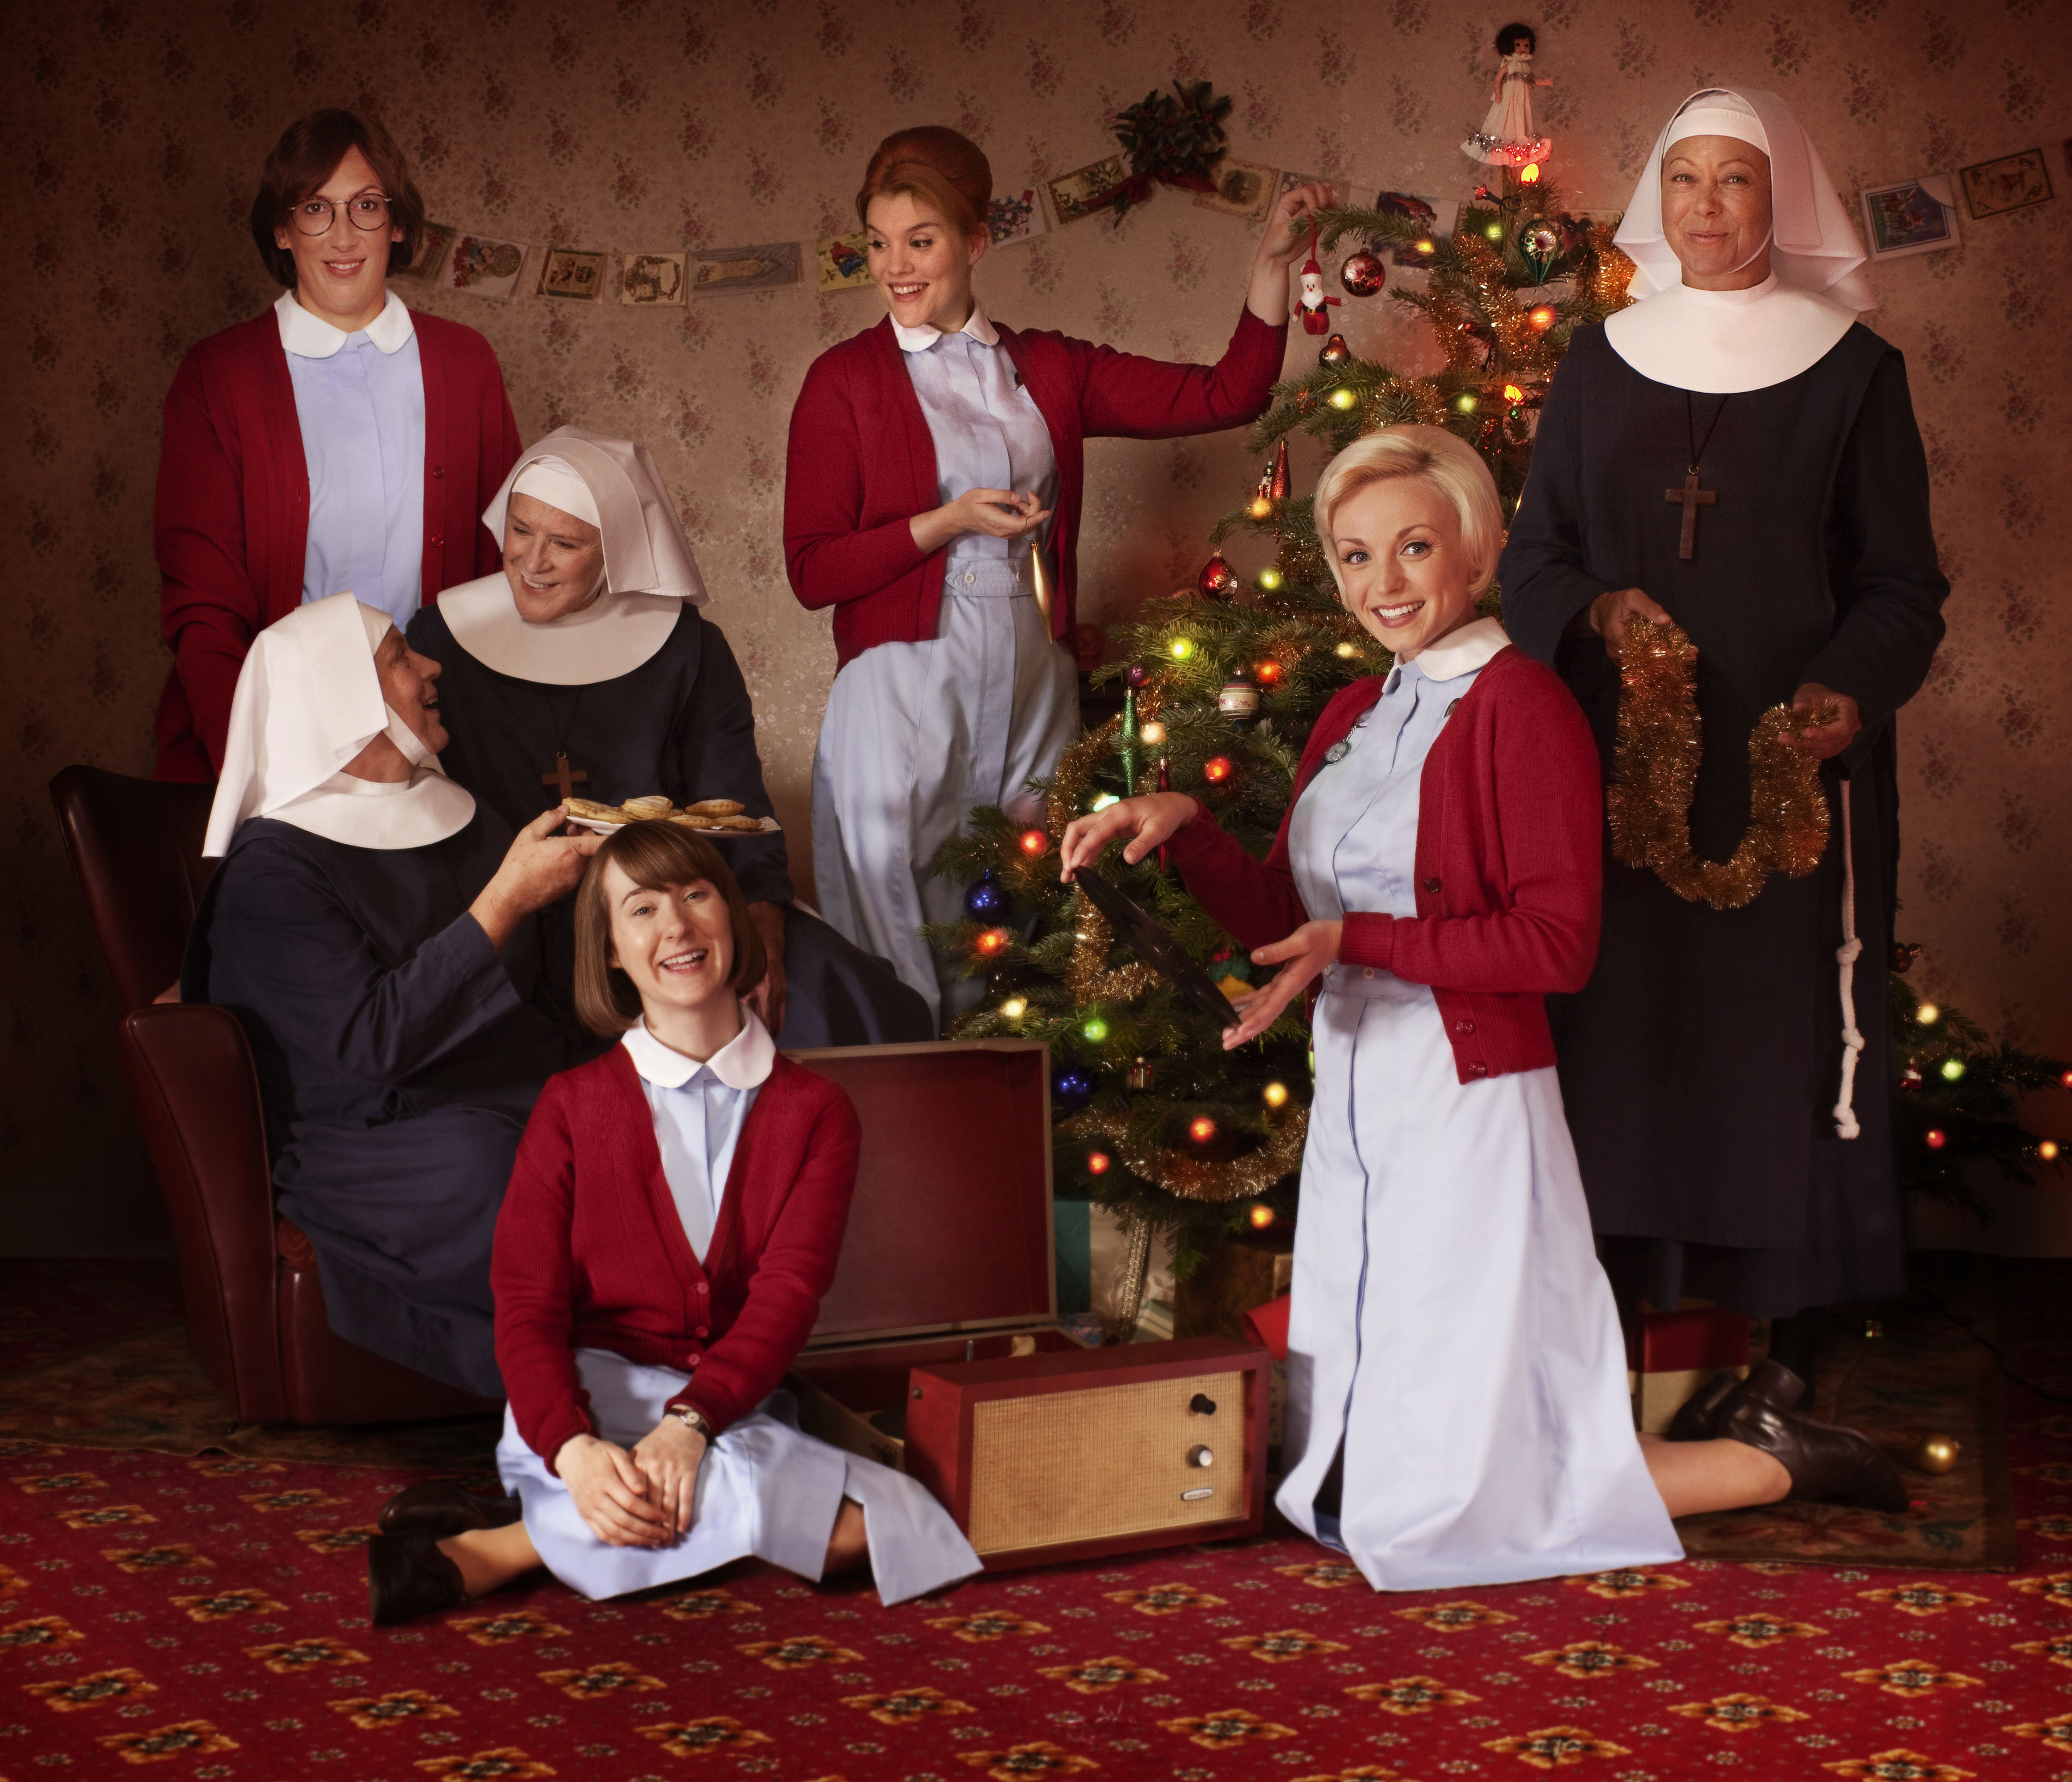 The Nonnatus House ladies are in the holiday spirit. (Photo: Courtesy of Laurence Cendrowicz/© Neal Street Productions)